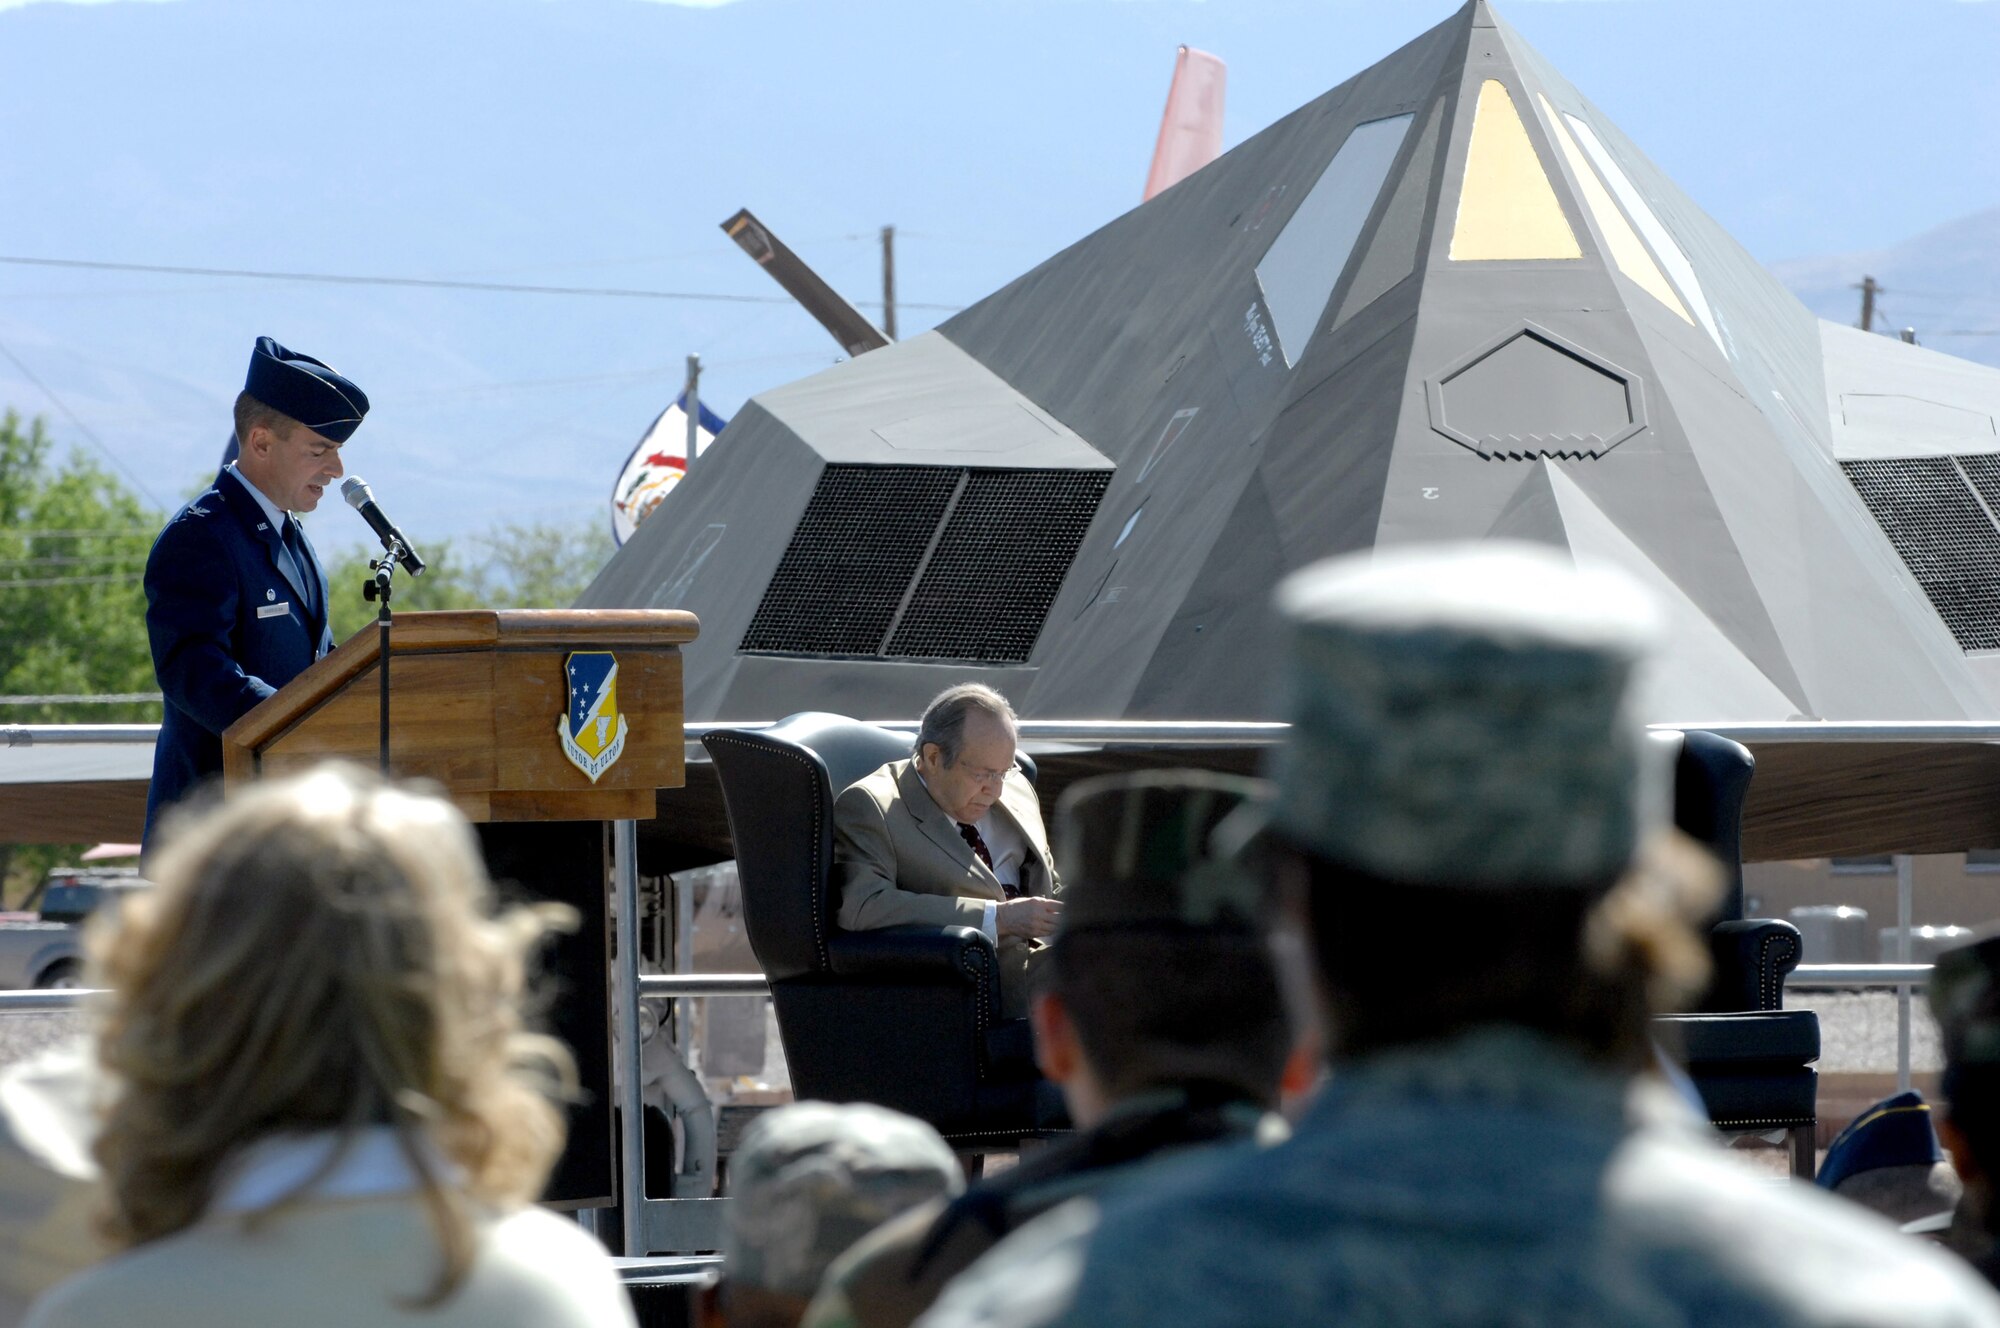 Colonel Jeff Harrigian, 49th Fighter Wing commander, introduces the guest speaker former Secretary of Defense Dr. William J. Perry during the Sunset Stealth F-117A Retirement Ceremony Apr 21, Holloman Air Force Base, N.M.
(U.S. Air Force photo/ Senior Airman Anthony Nelson Jr)
